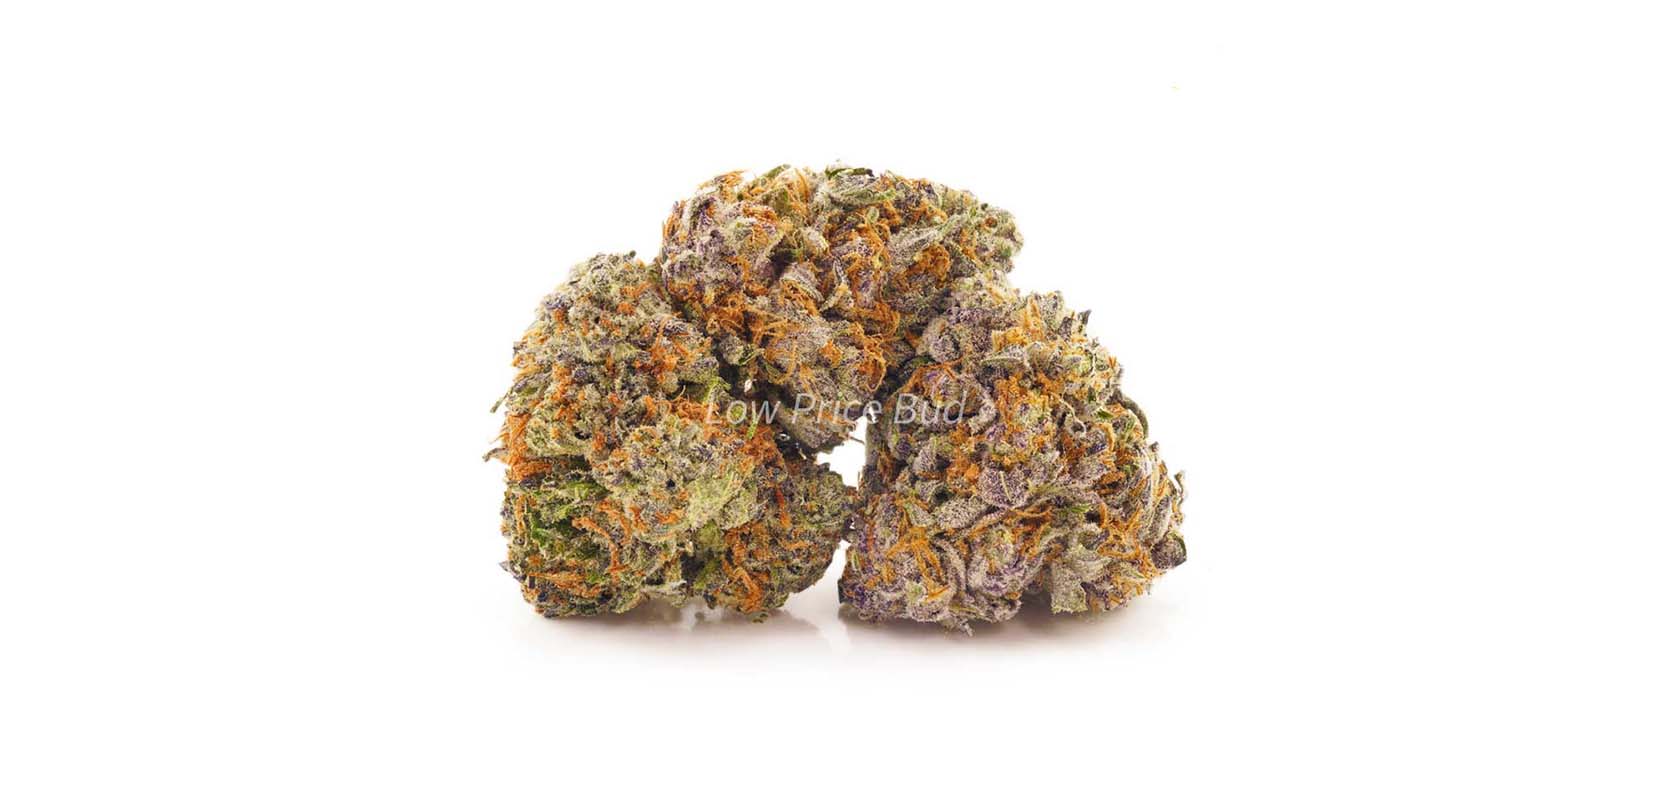 Alien Cookies weed online Canada. Value buds from Low Price Bud dispensary. Cheapweed mail order marijuana.